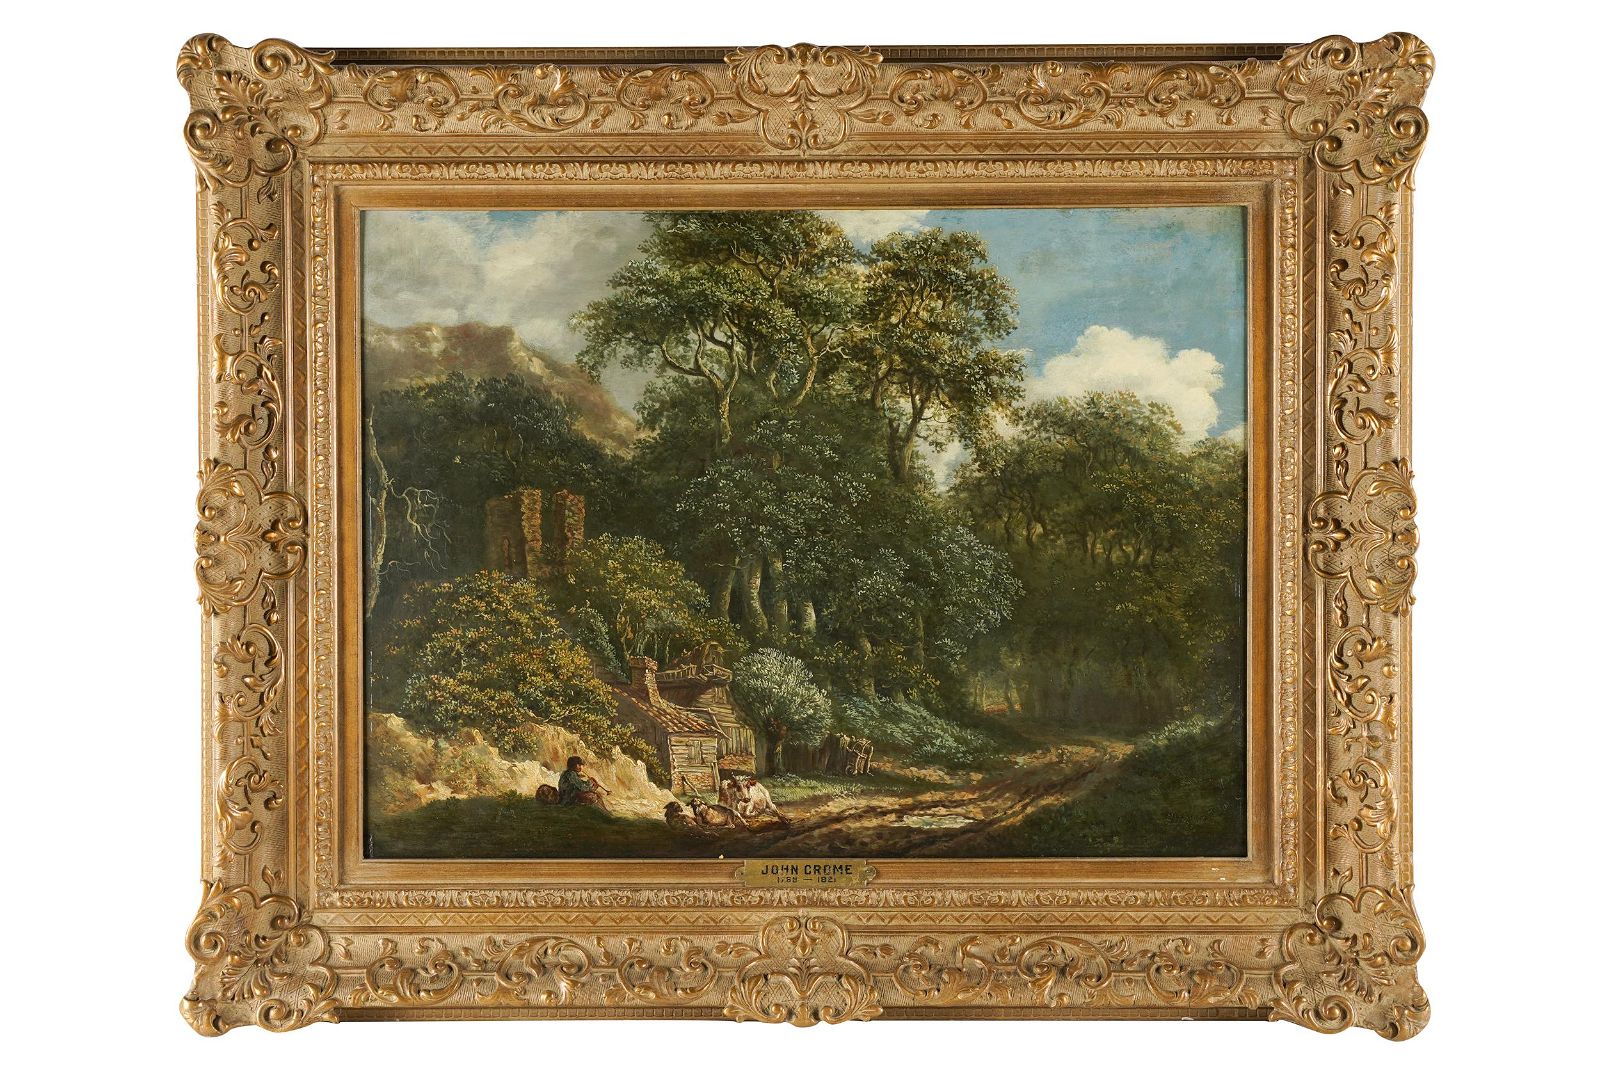 ATTRIBUTED TO JOHN CROME 1769 3974c0